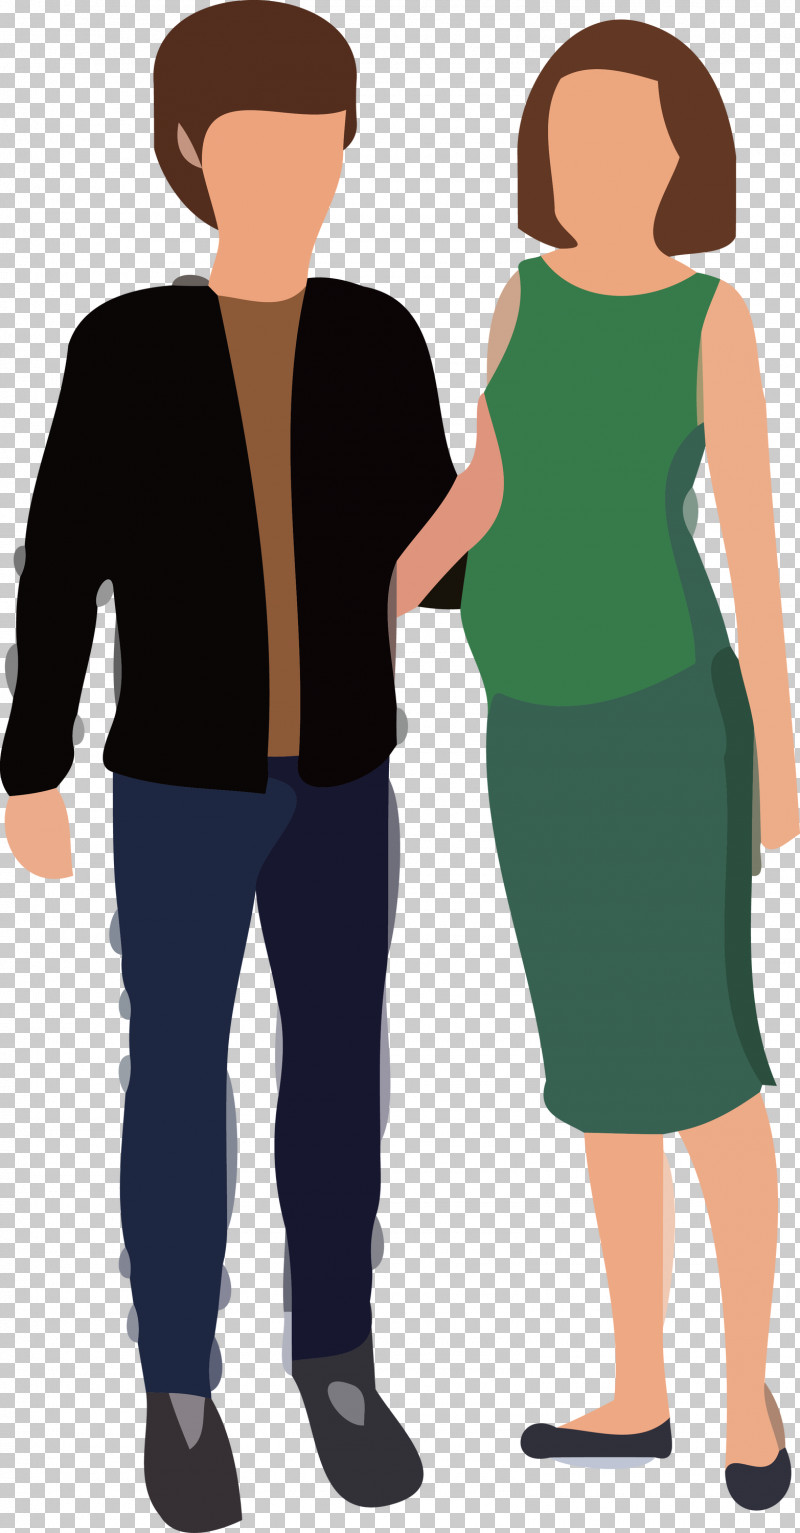 Couple Lover PNG, Clipart, Cartoon, Conversation, Couple, Finger, Gesture Free PNG Download